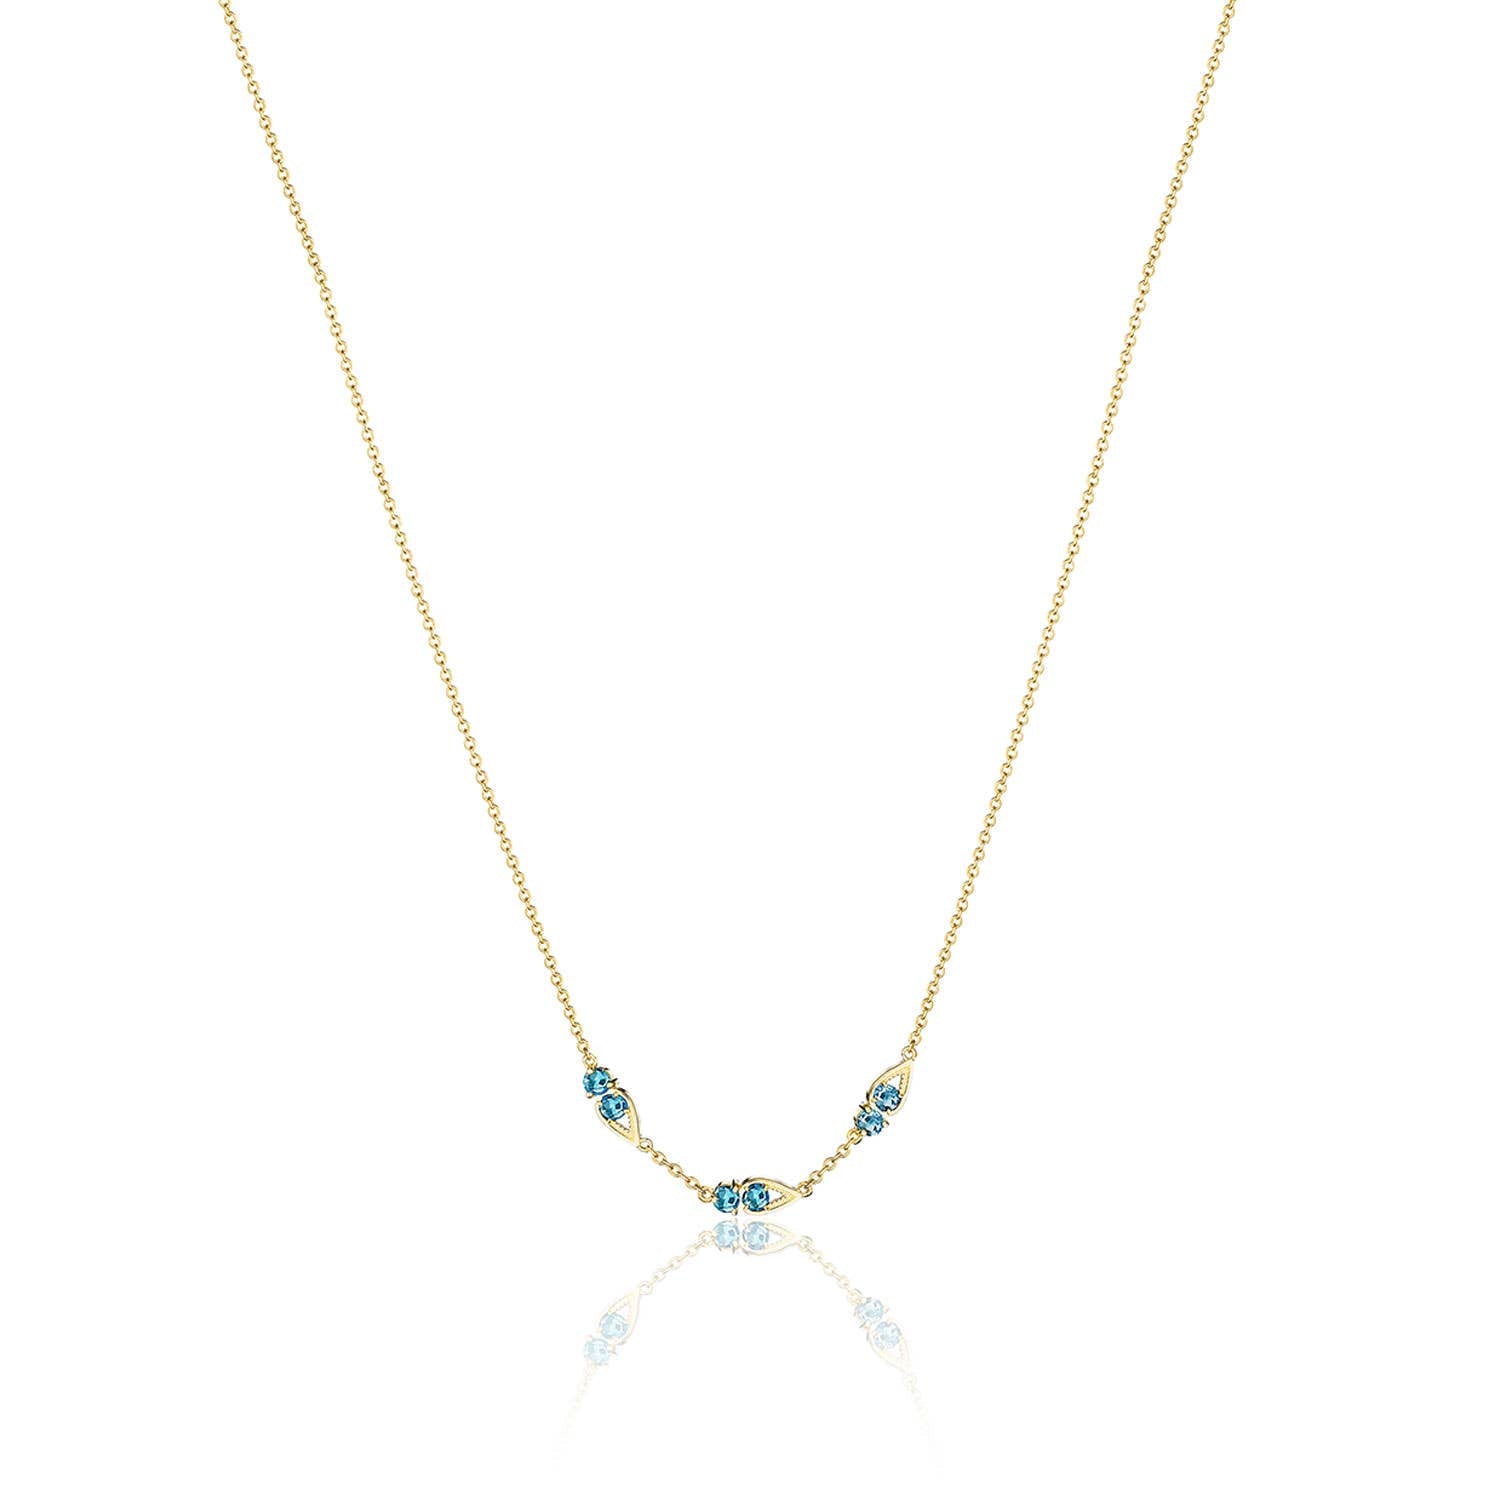 Petite Open Crescent Gemstone Necklace with London Blue Topaz